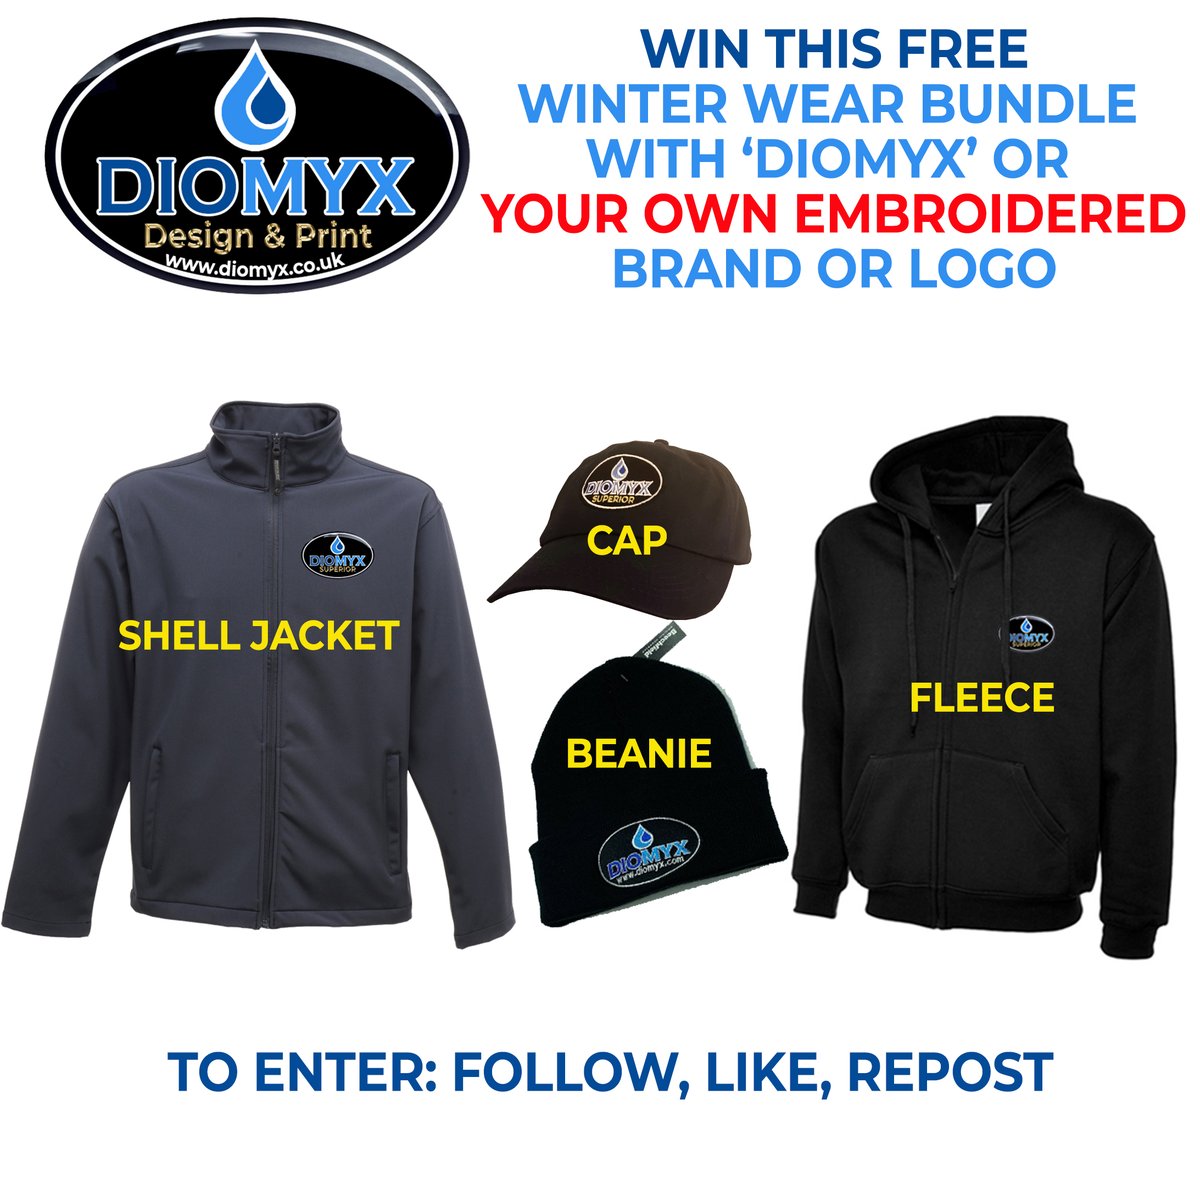 To celebrate the launch of our NEW DIOMYX Design & Print division we are giving away FREE Embroidered Workwear with DIOMYX or YOUR OWN NAME OR BRAND... To Enter: -FOLLOW -LIKE -RETWEET DOUBLE YOUR CHANCES OF WINNING BY FOLLOWING @diomyxprint on Facebook diomyx.co.uk